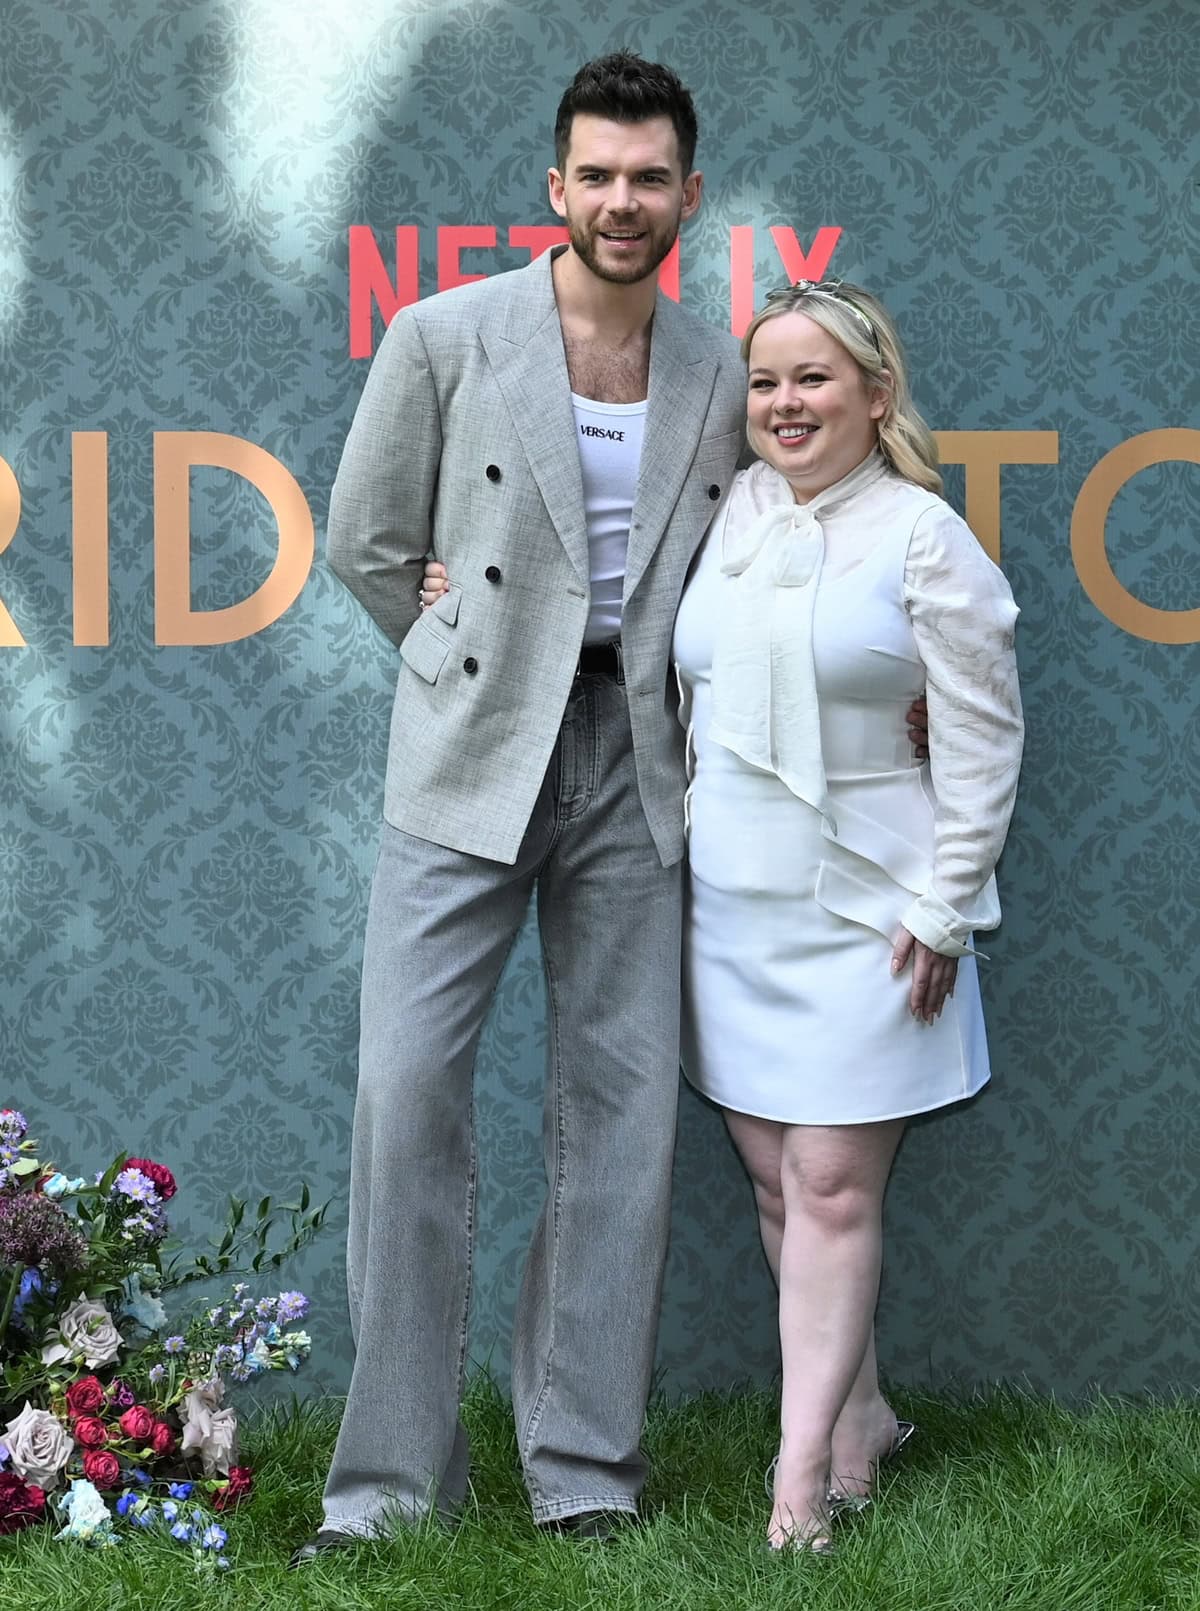 Height Contrast at Bridgerton Photocall: Luke Newton towers over Nicola Coughlan, highlighting their striking height difference as they pose together in stylish Versace outfits